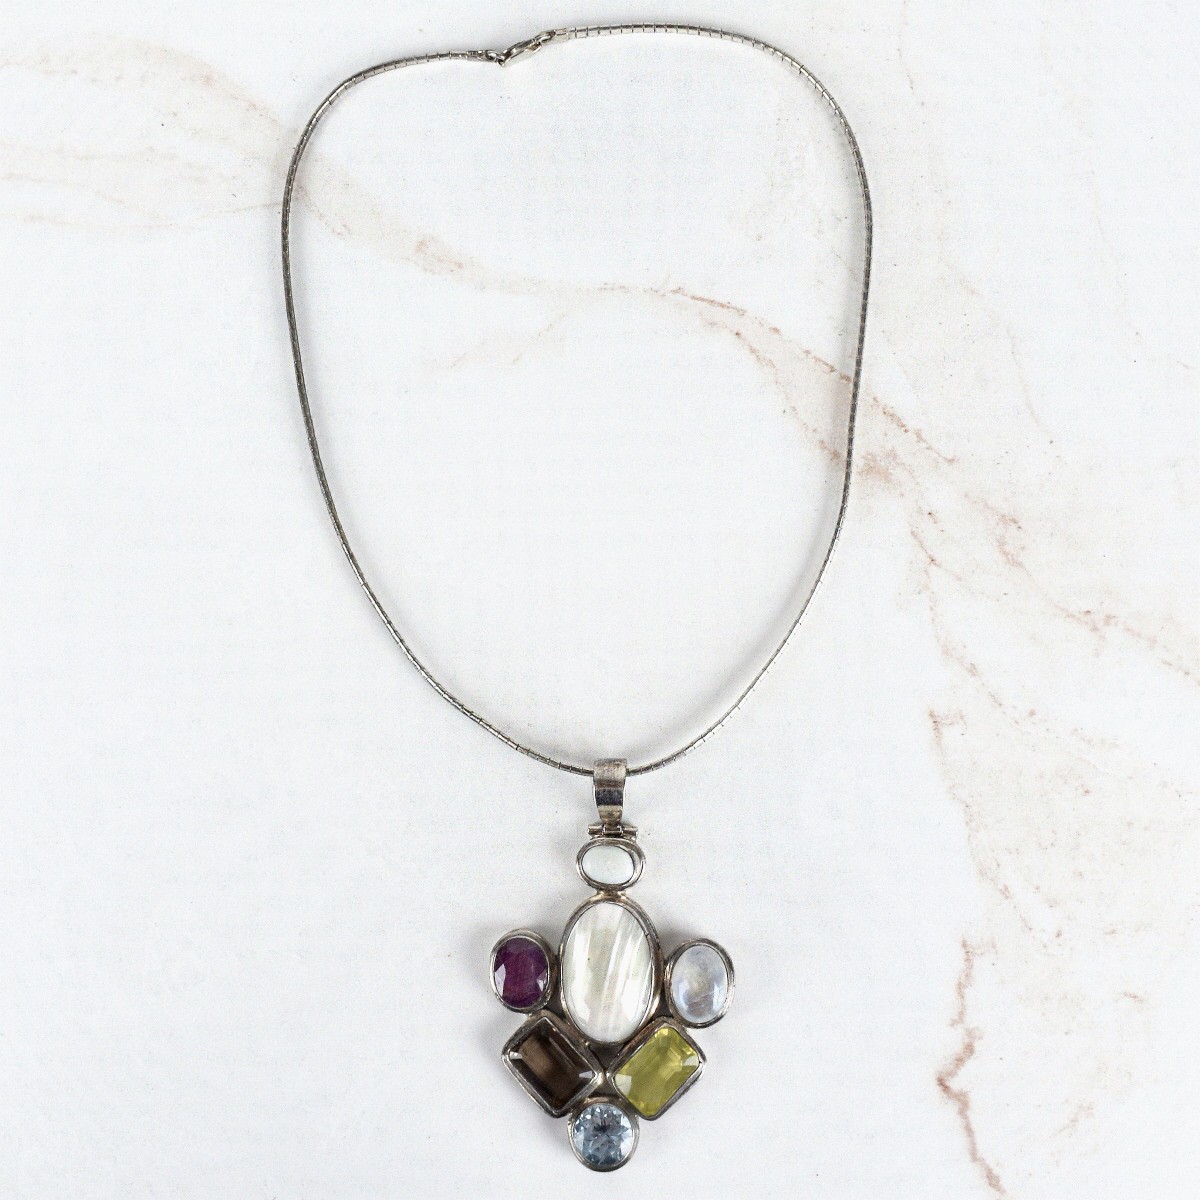 Gemstone and Sterling Necklace